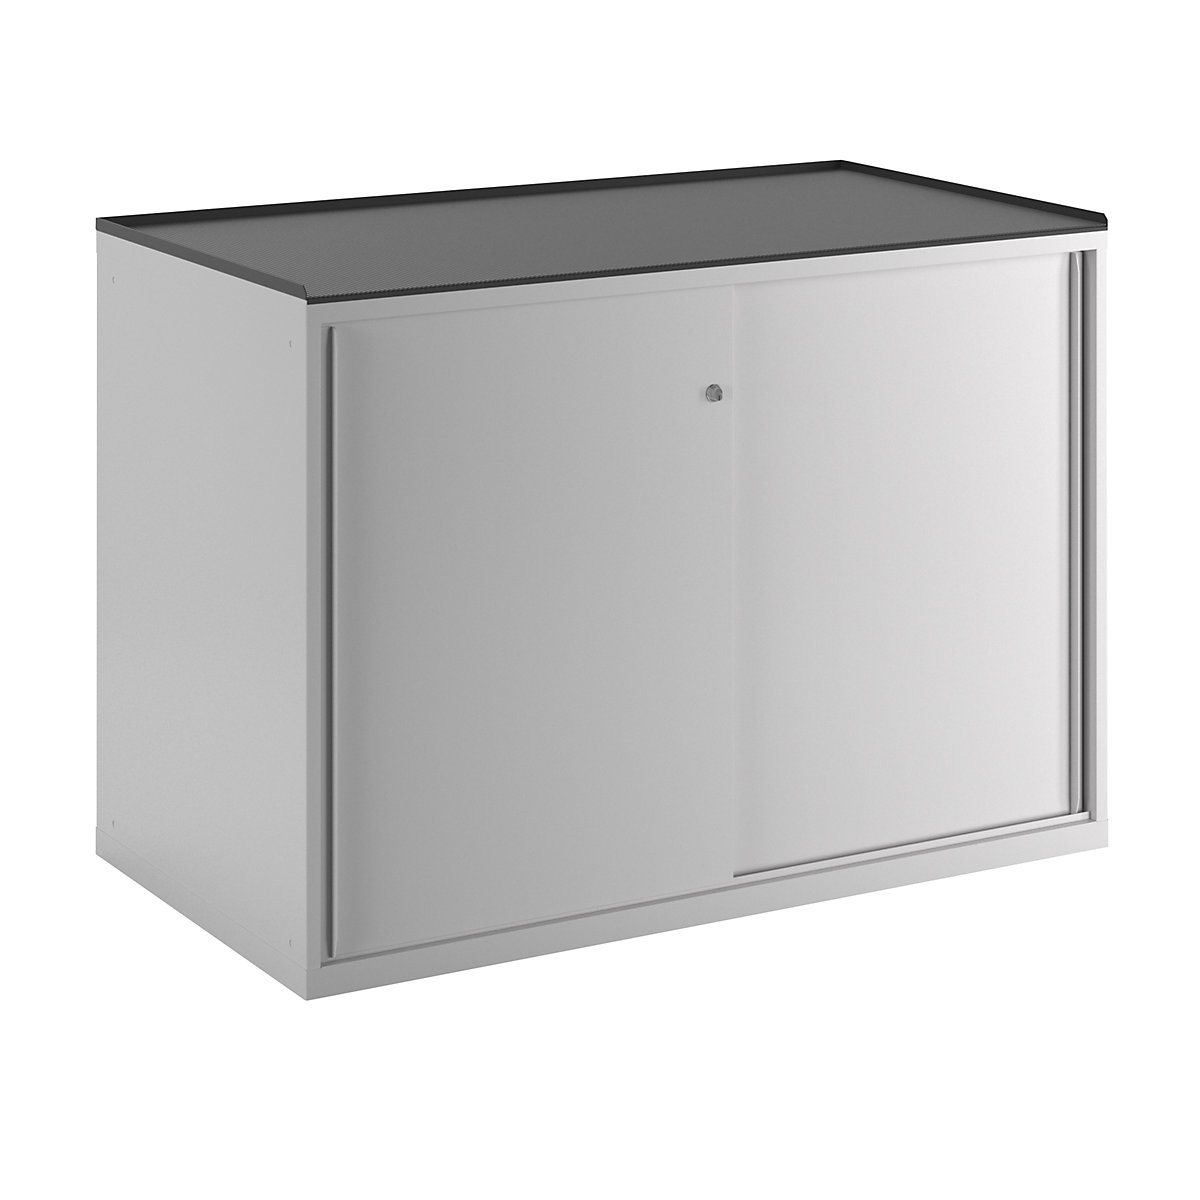 Sliding door cupboard, max. load of pull-out shelf 200 kg – LISTA, 4 drawers, 2 pull-out shelves, light grey-5